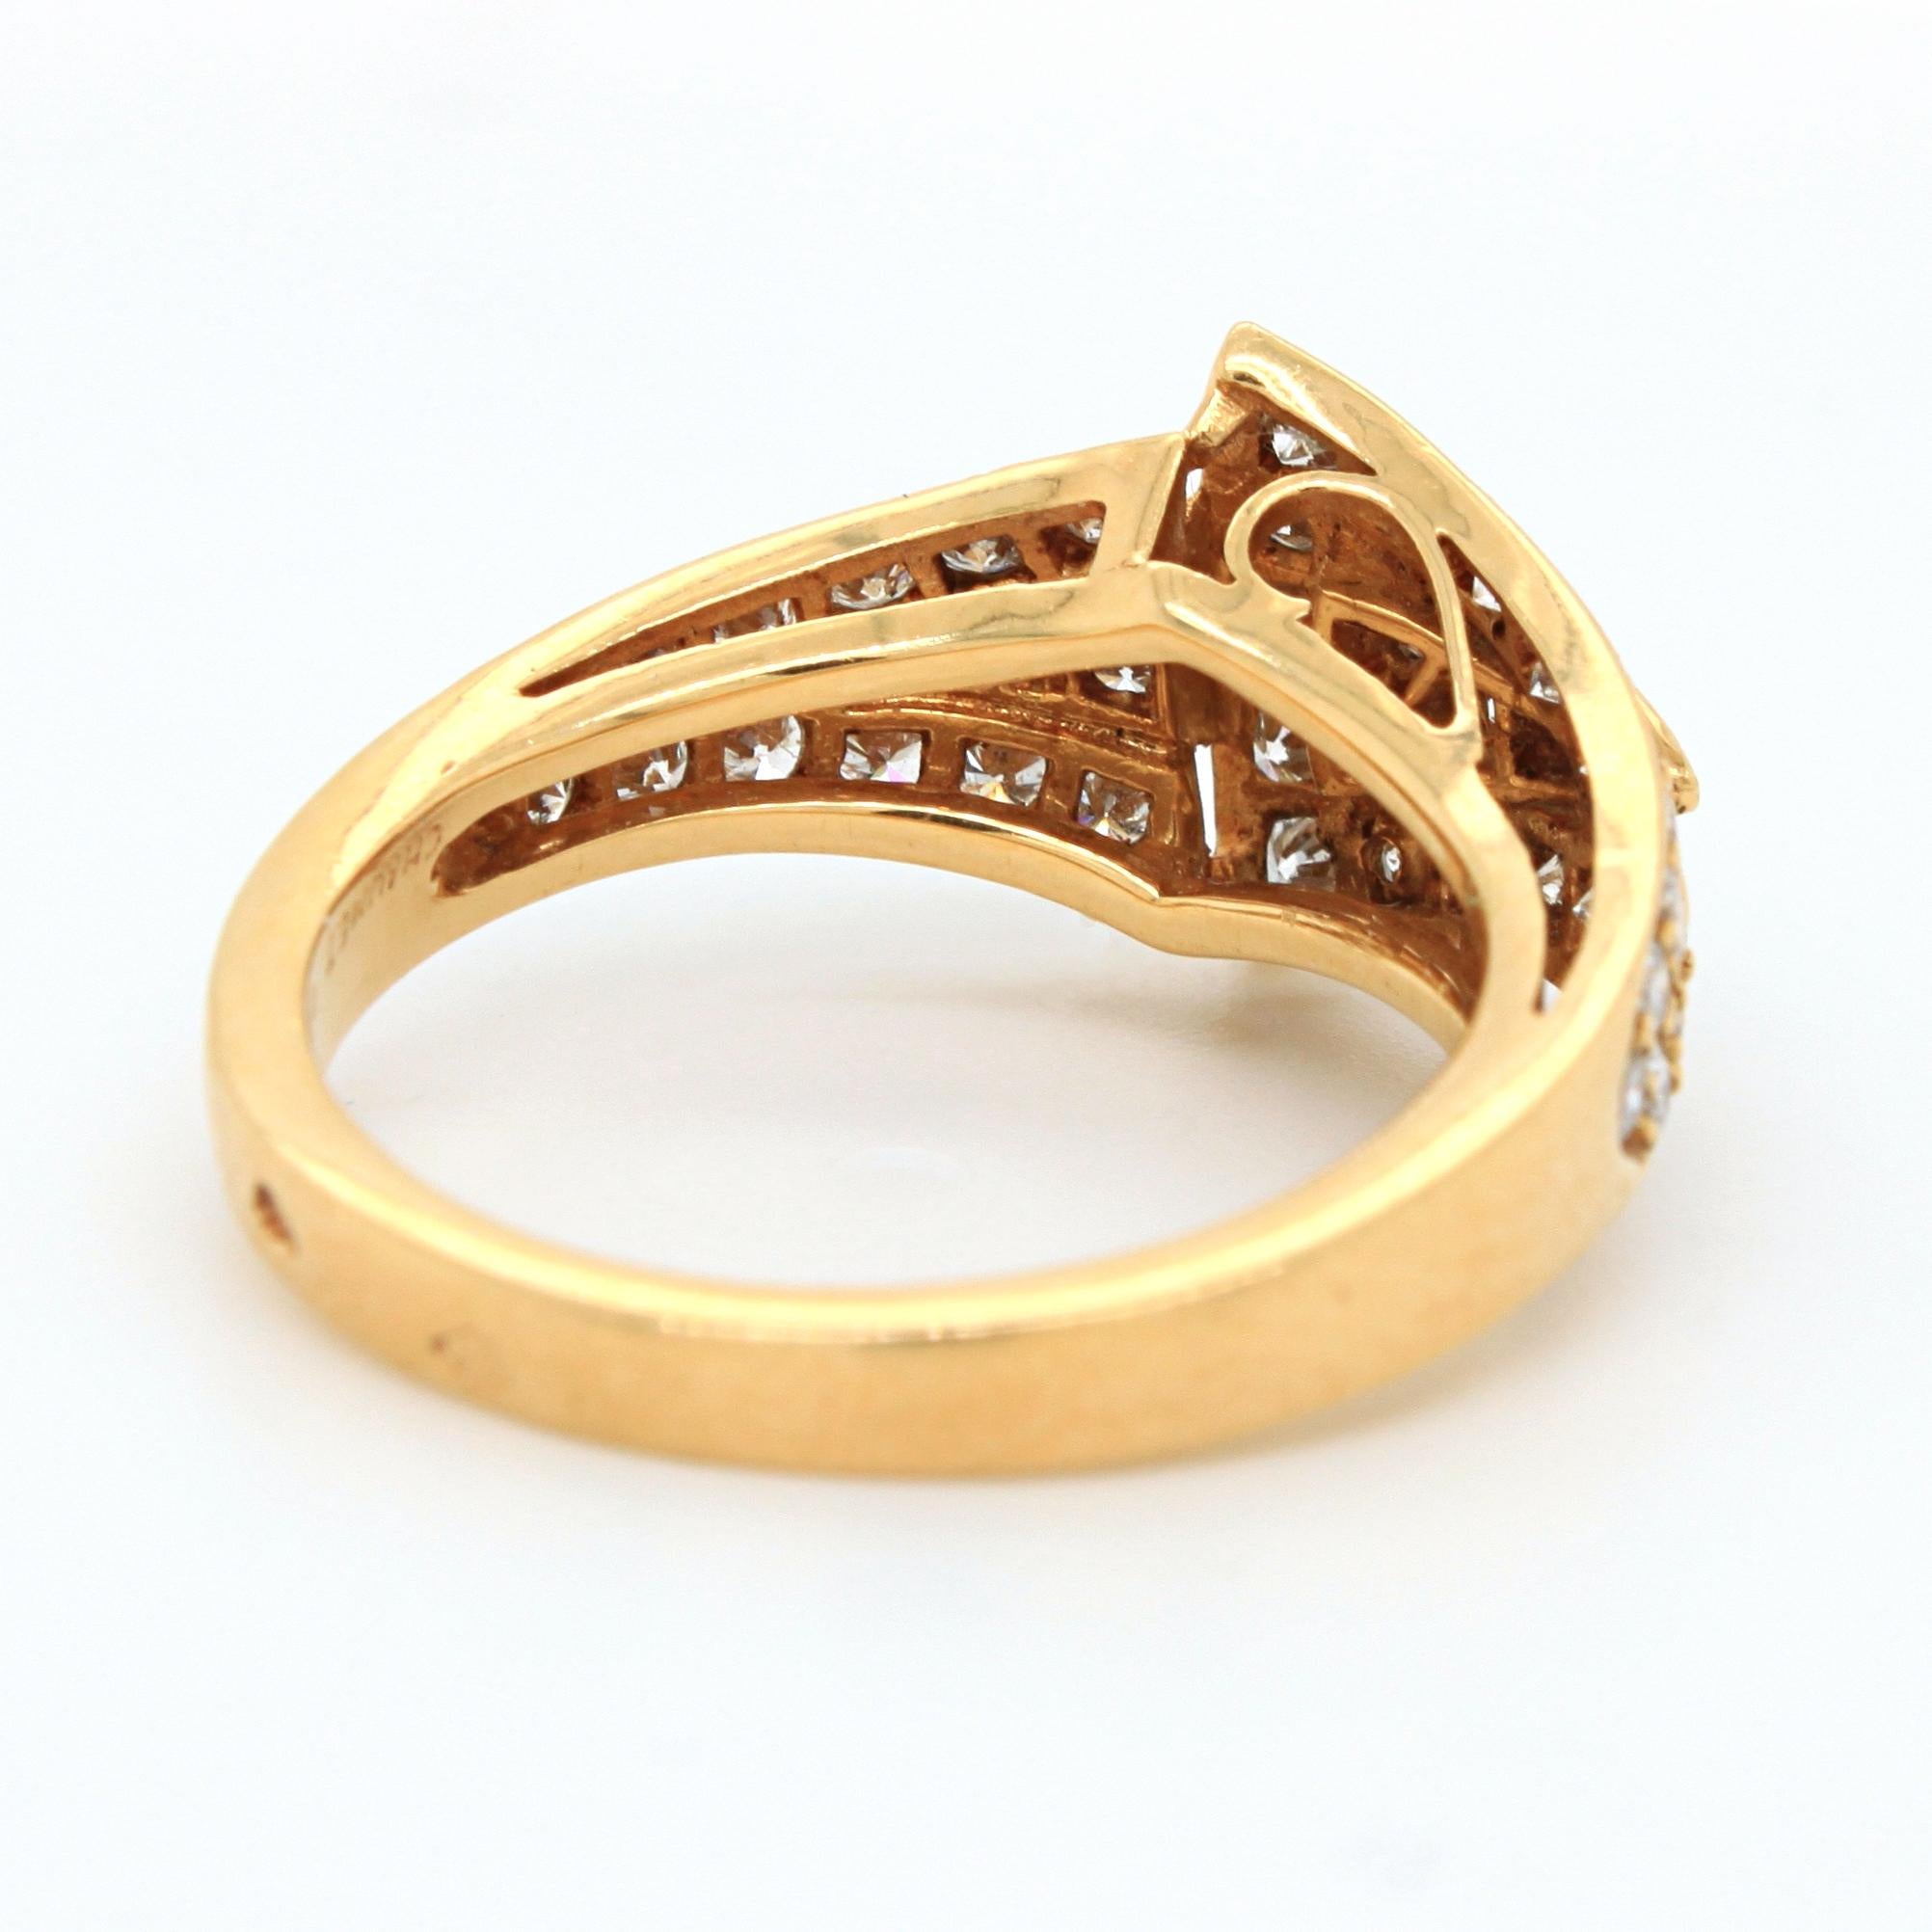 Geometric Diamond Ring in 18k Yellow Gold, by Chaumet, 20th Century 2